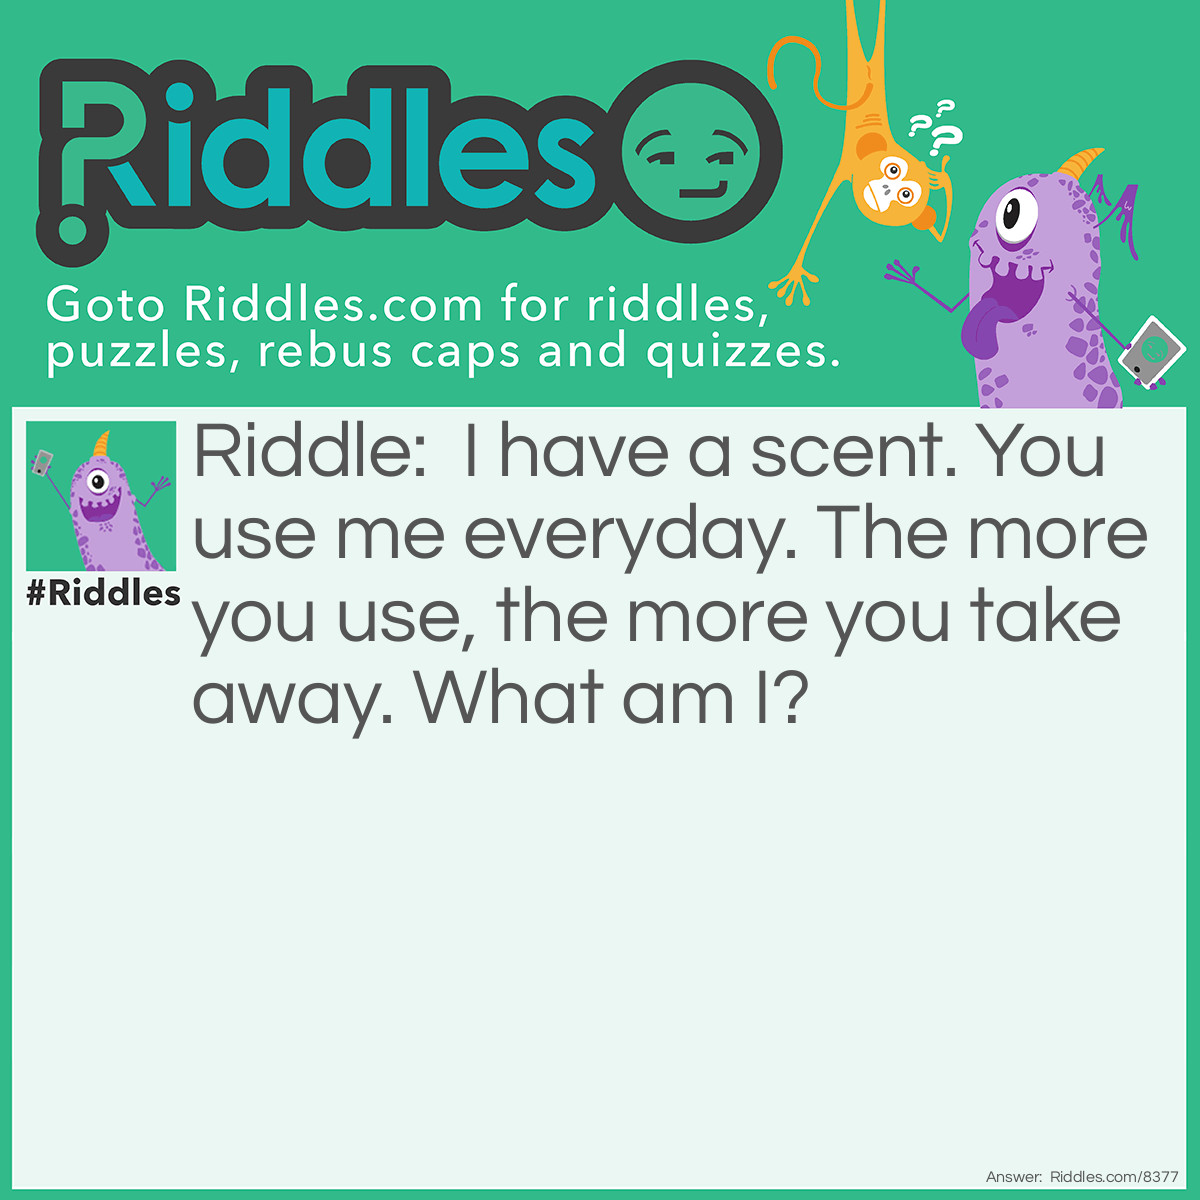 Riddle: I have a scent. You use me everyday. The more you use, the more you take away. What am I? Answer: A bar of soap!